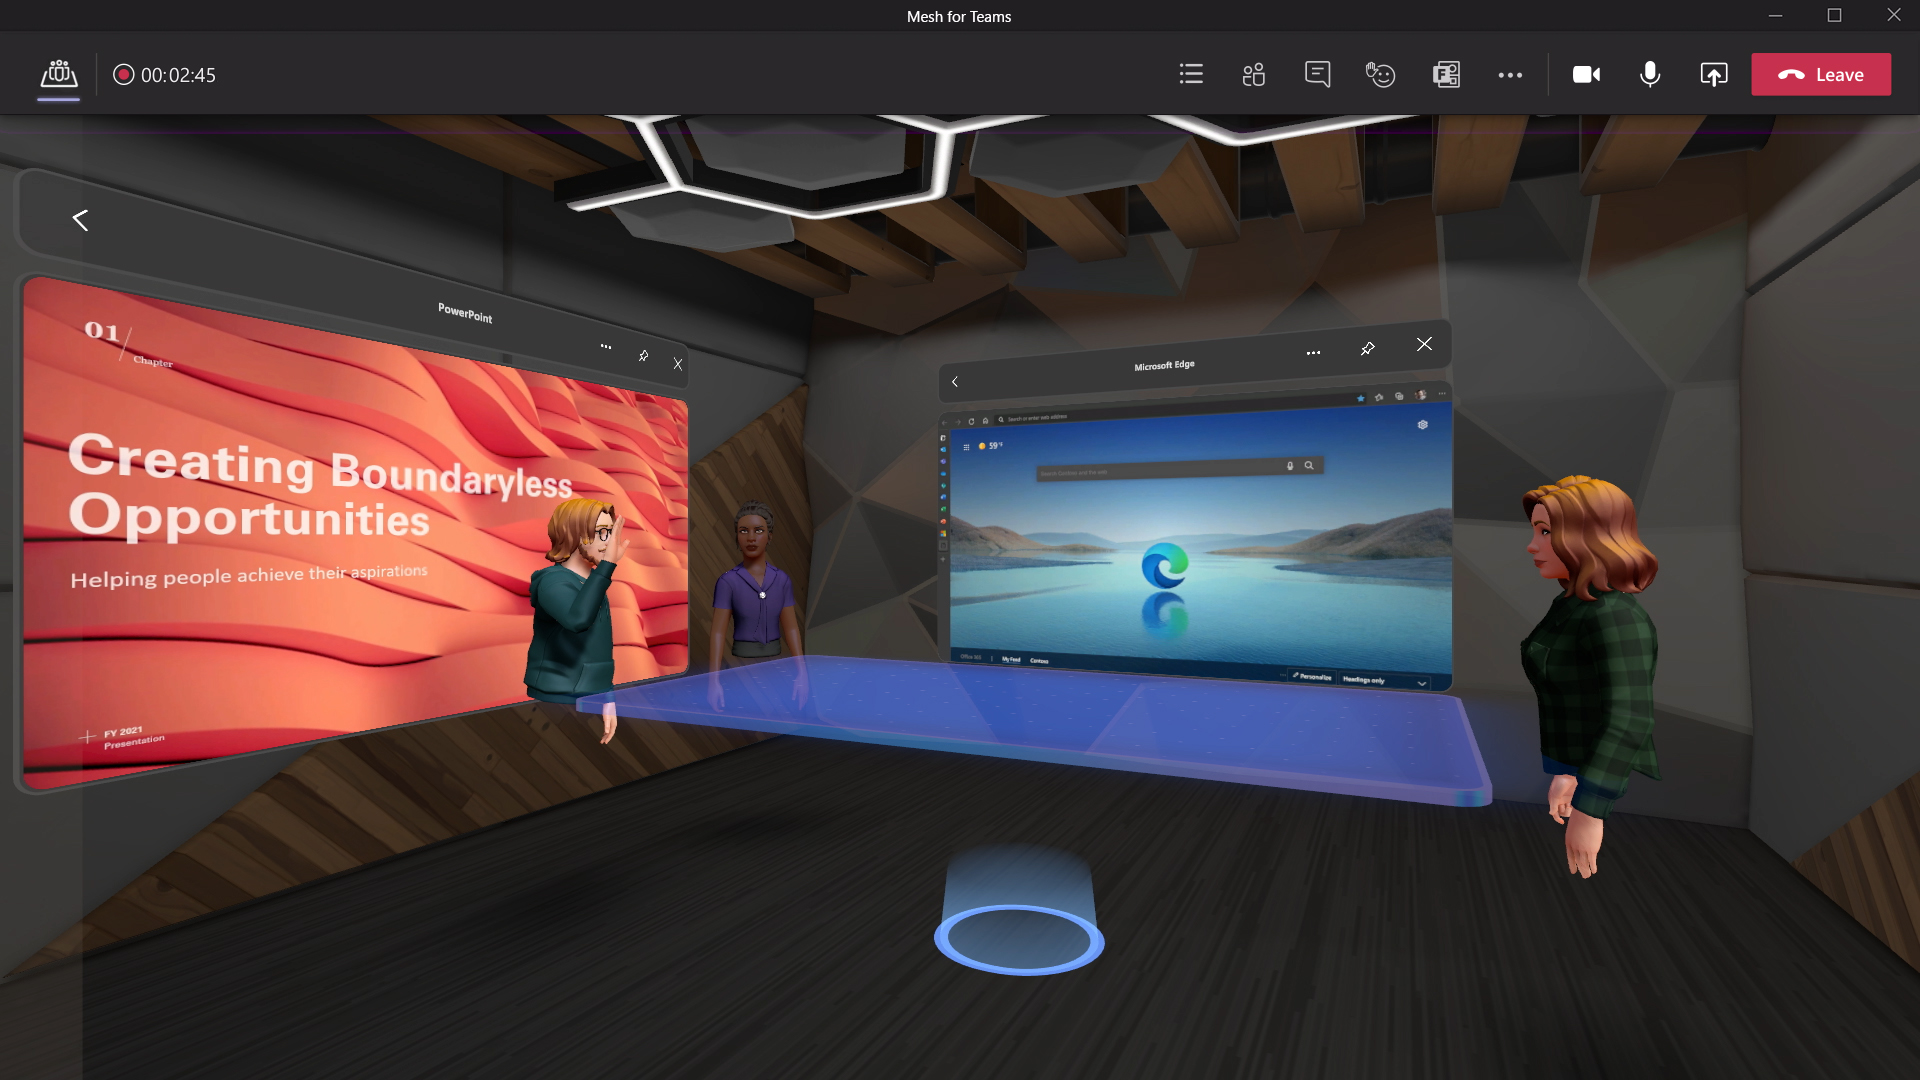 Avatars meet and collaborate in a Mesh for Teams immersive space. Image courtesy of Microsoft